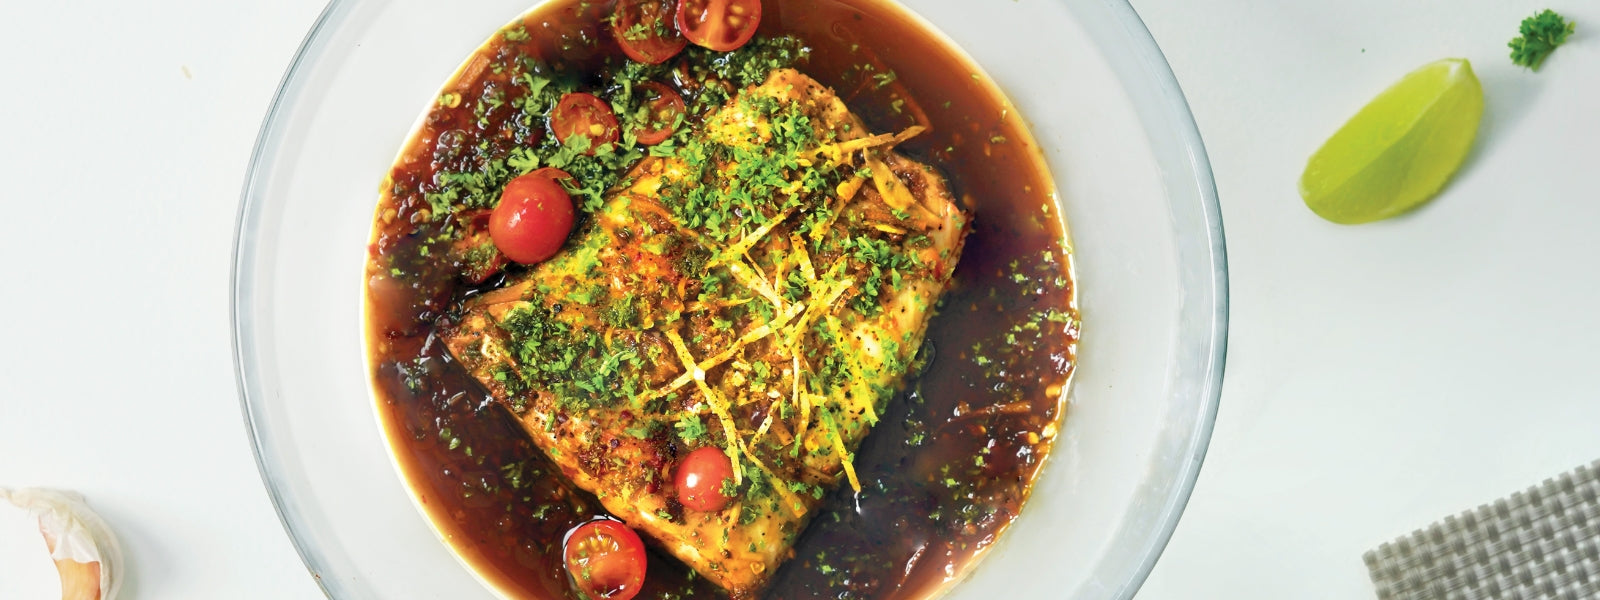 Microwave Ginger Soy Fish - Quick and Flavorful